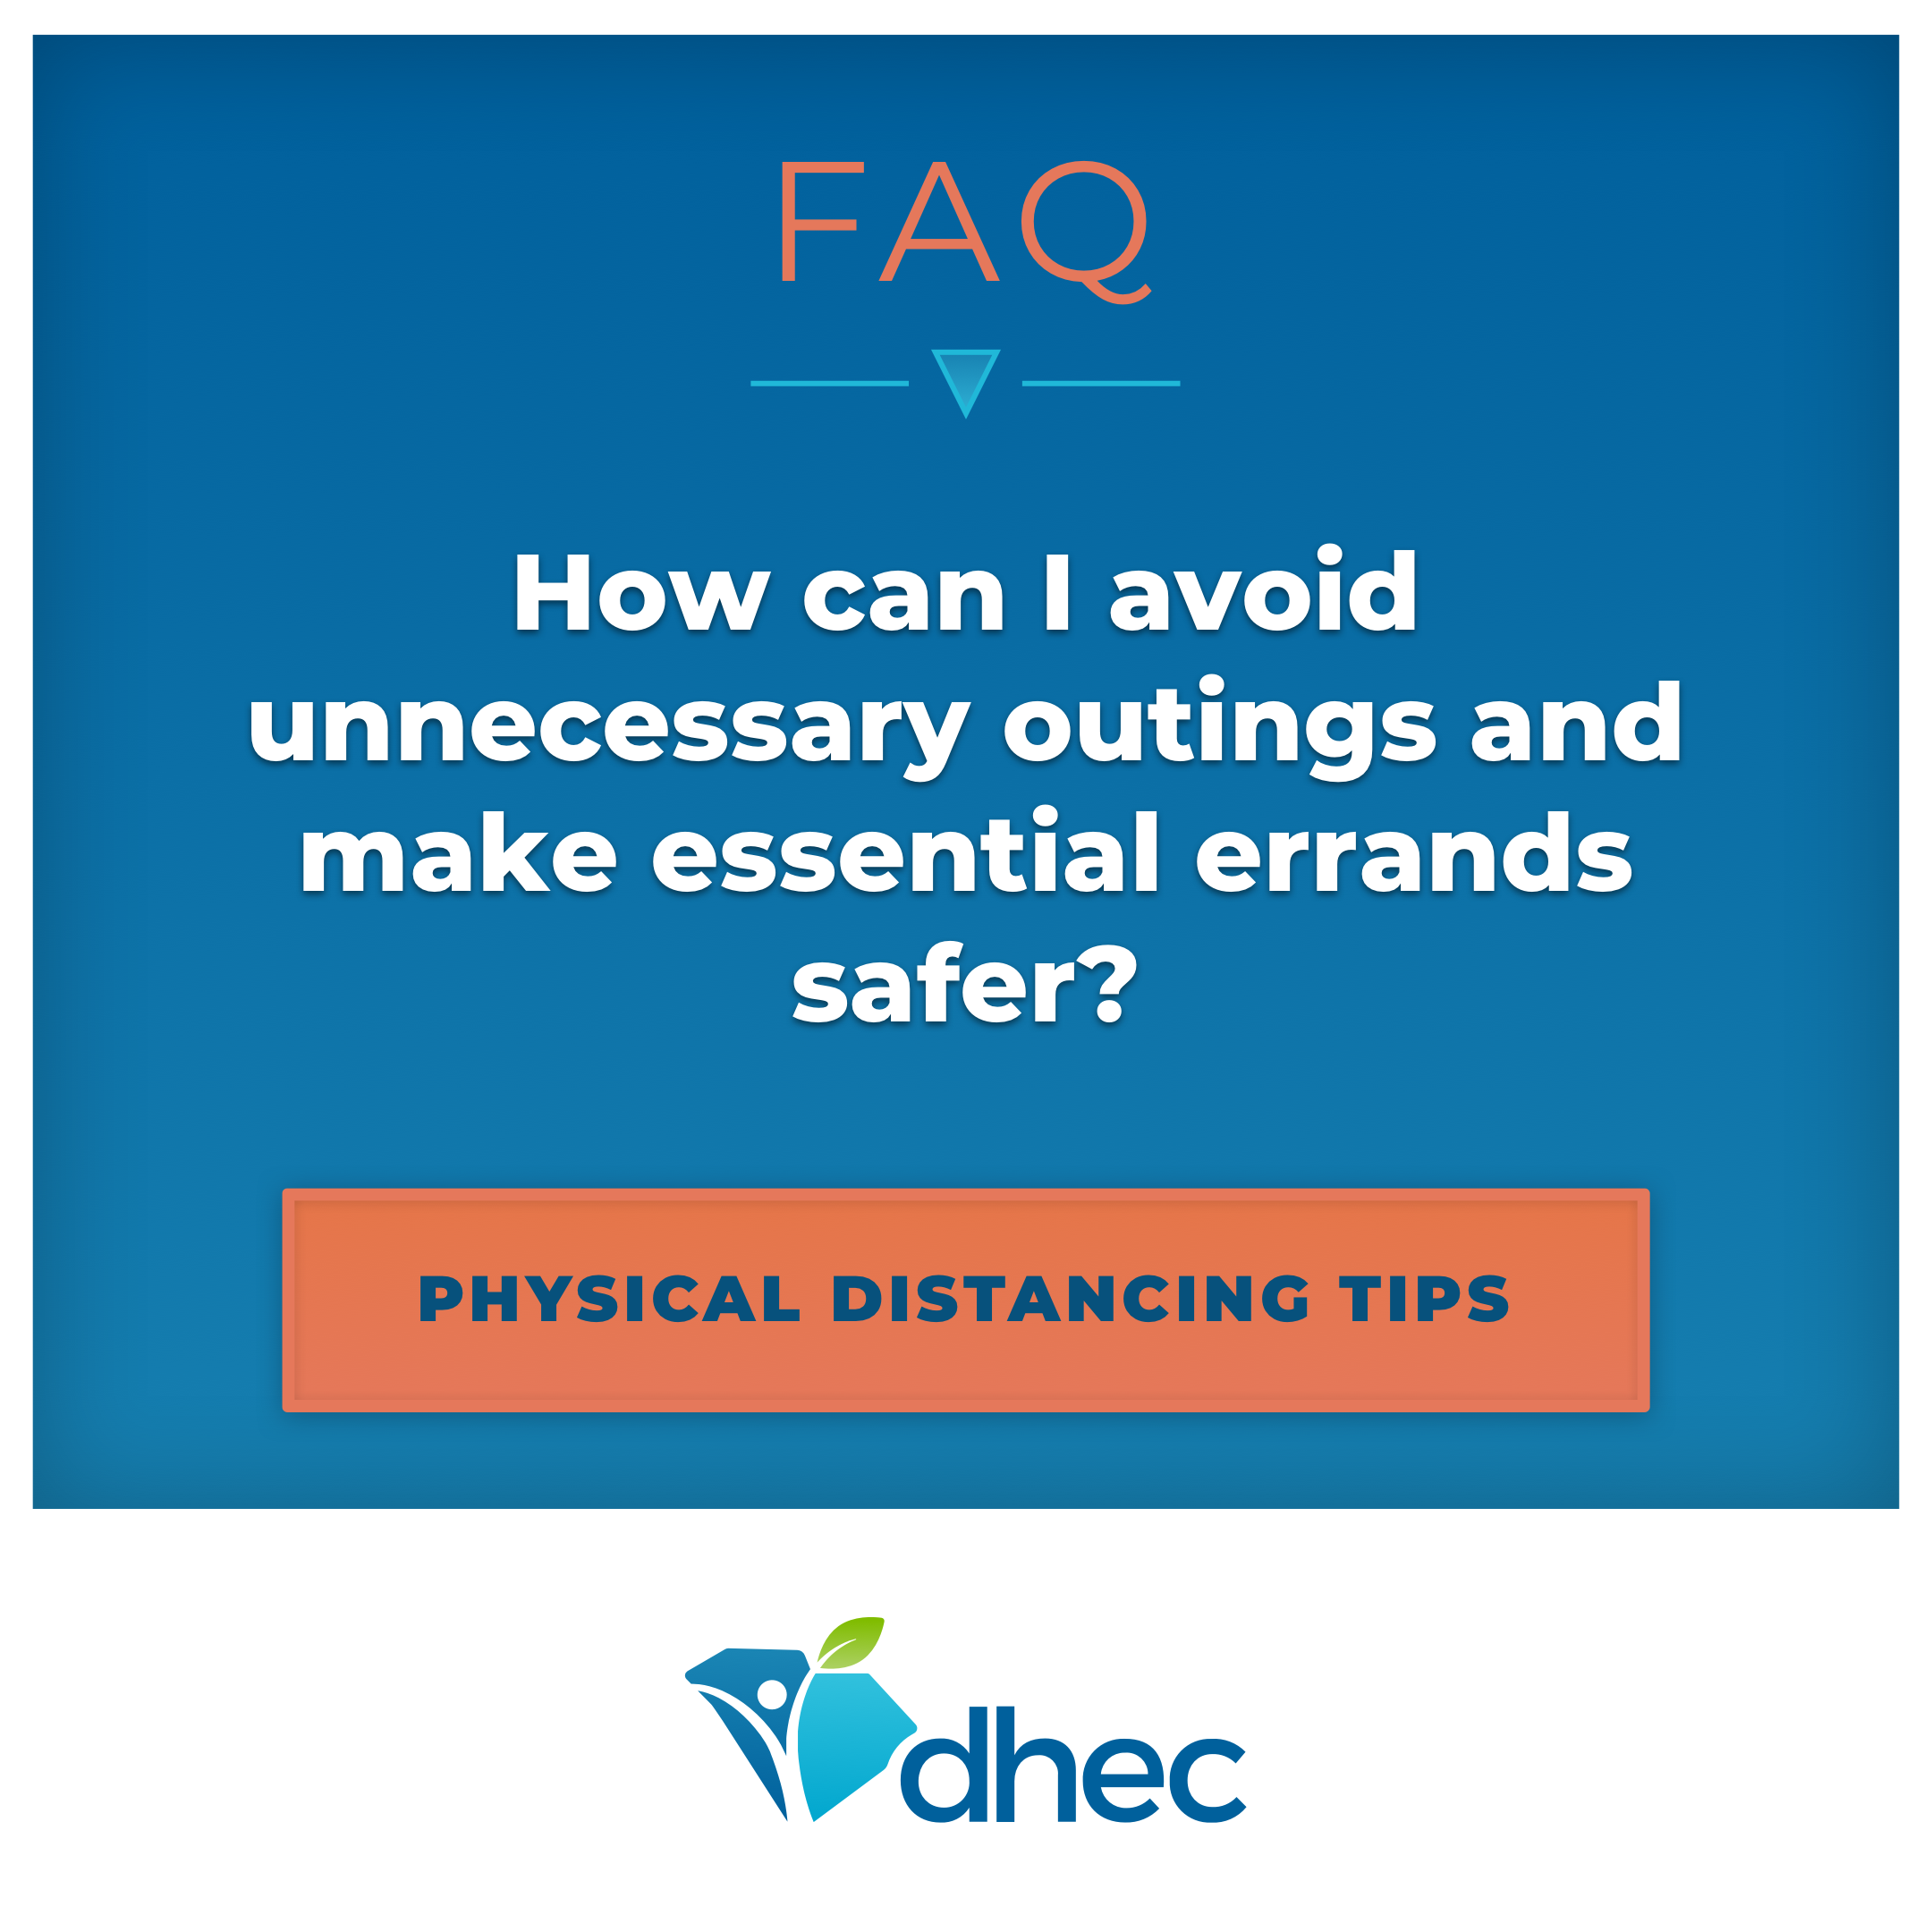 COVID FAQ: How can I avoid unnecessary outings and make errands safer?